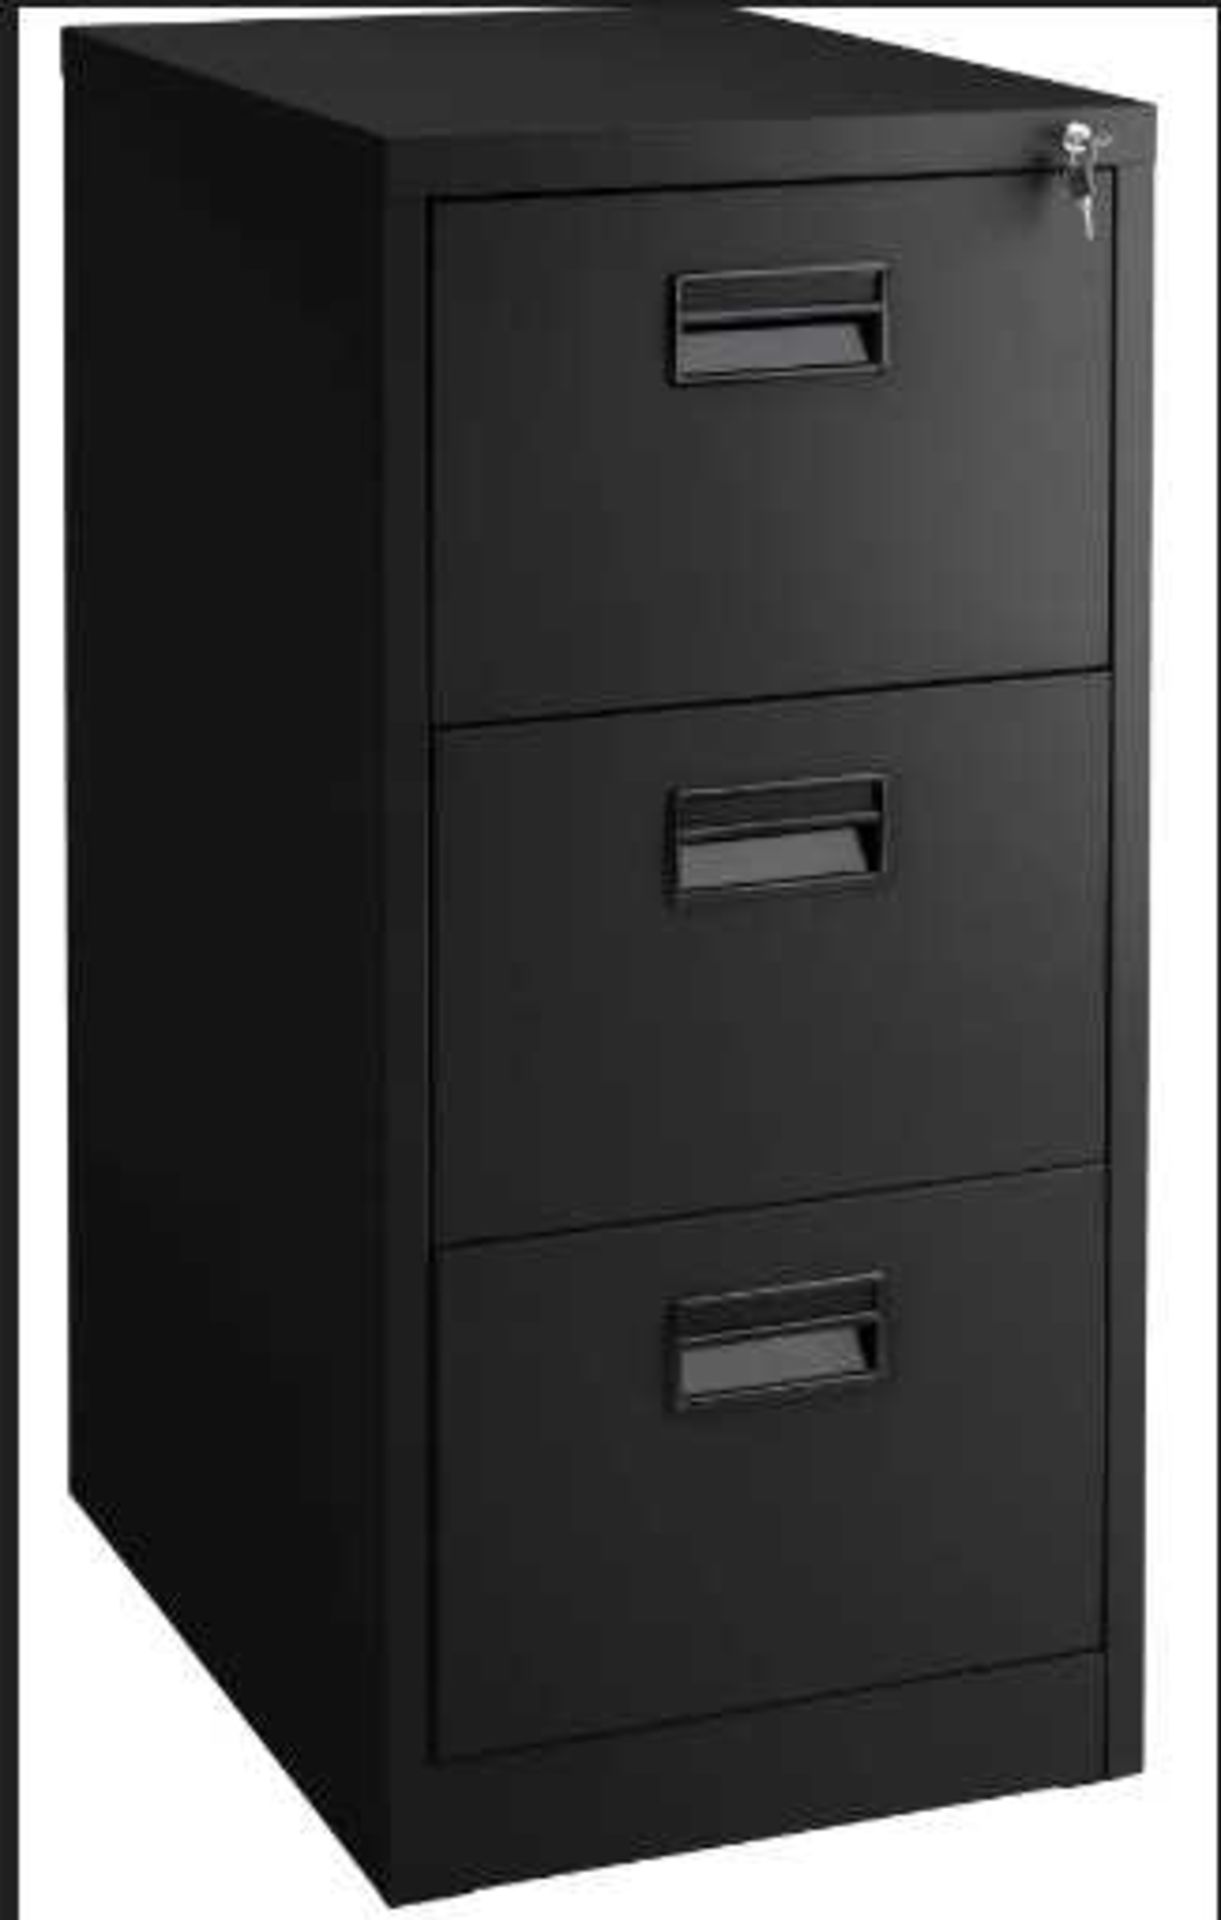 VAT Tectake - Filing Cabinet with 3 Shelves 62.4 x 46 x 102.8 cm Black - Unchecked & Boxed. RRP